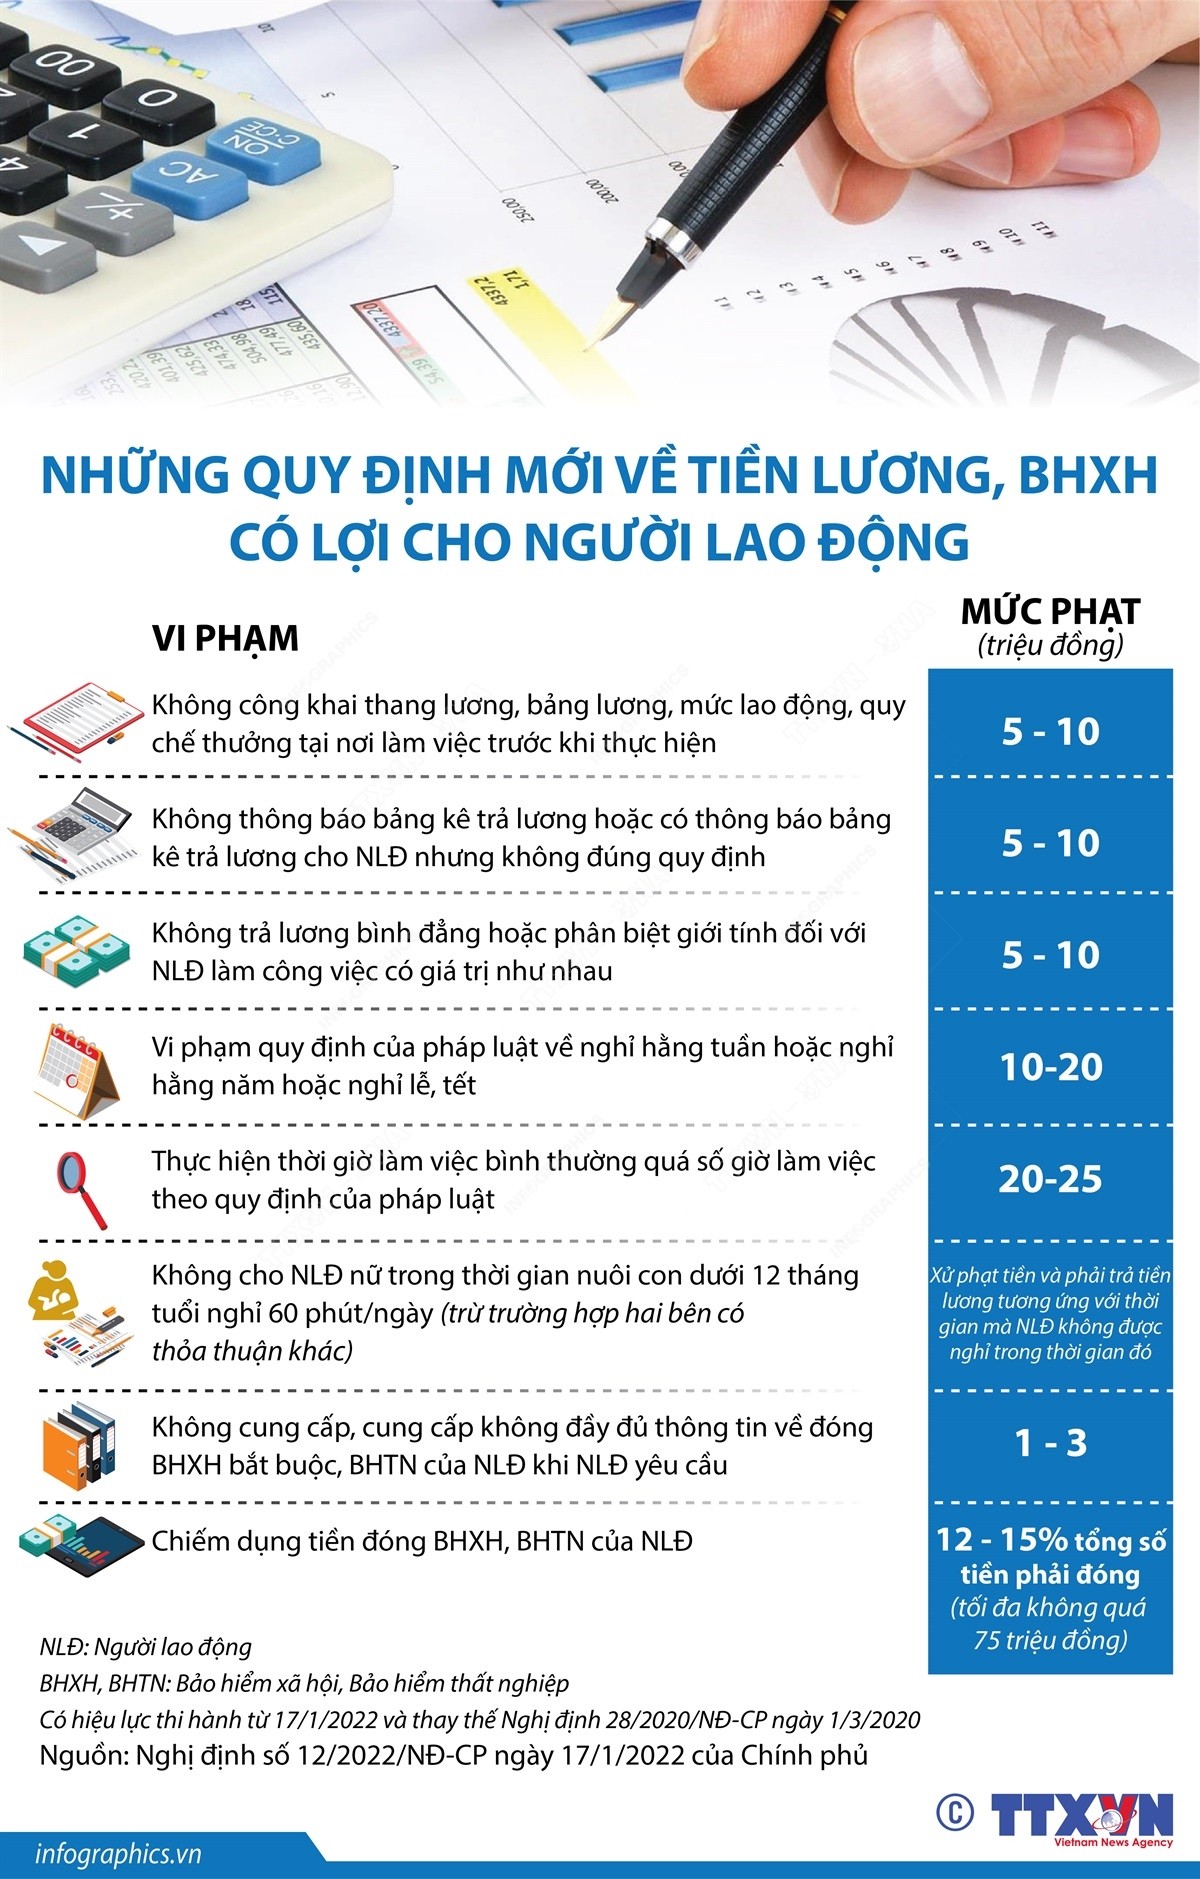 nhung-quy-dinh-moi-ve-tien-luong-bhxh-co-loi-cho-nguoi-lao-dong-1648024489.jpg